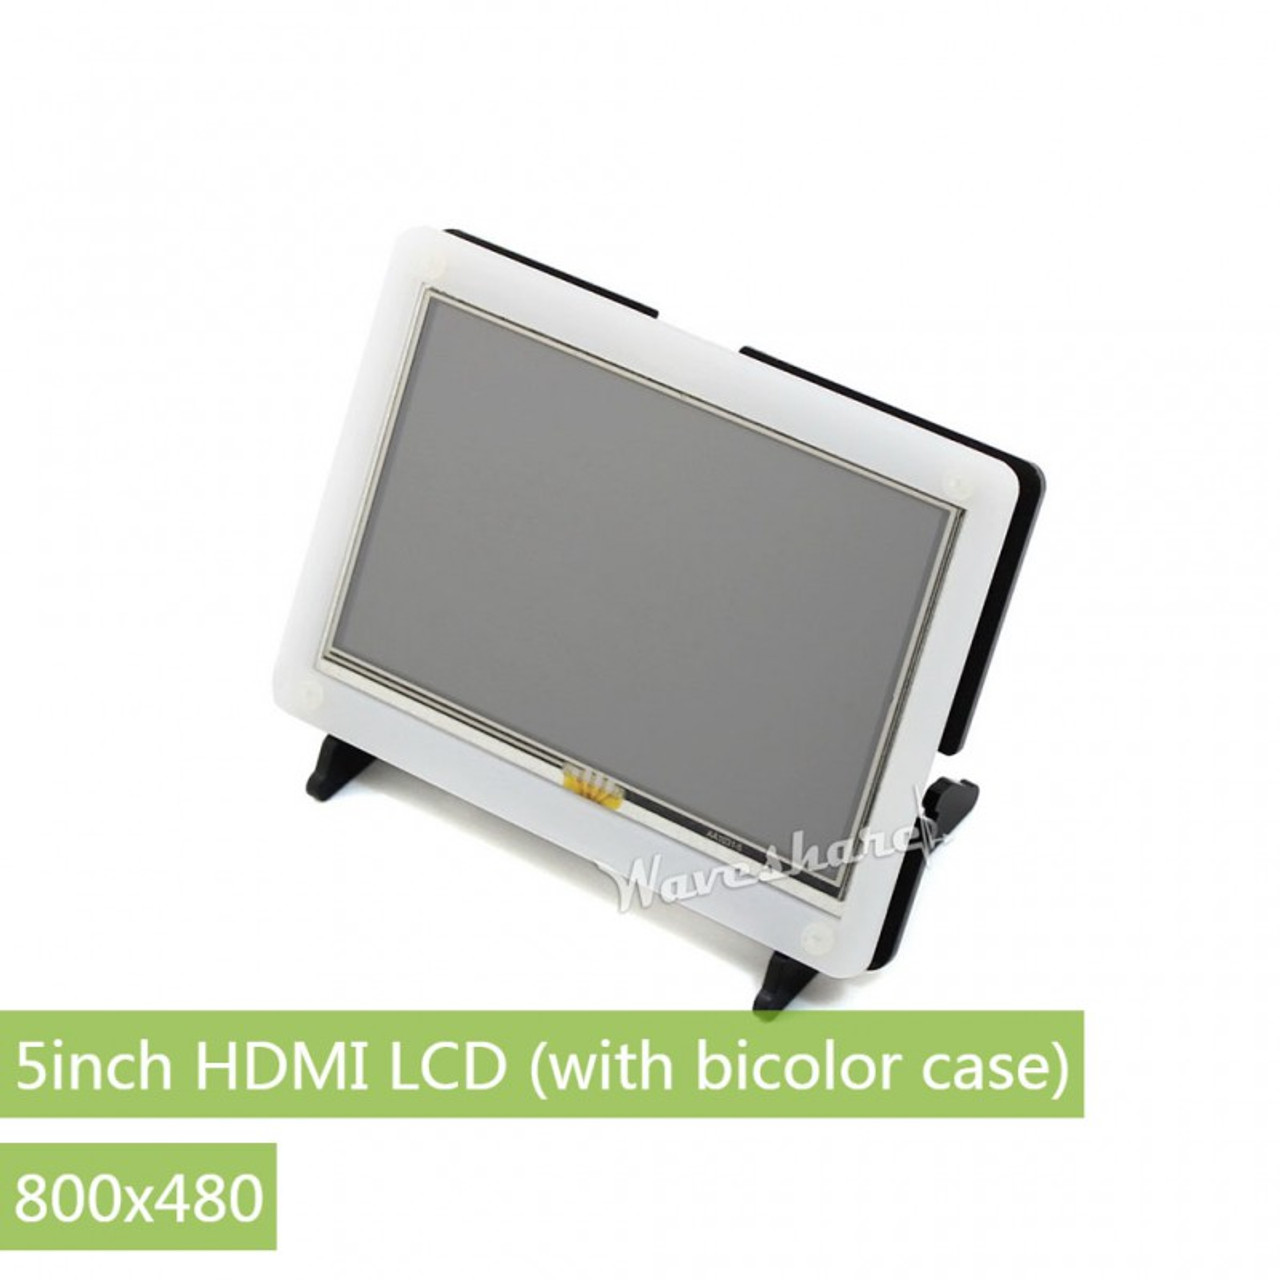 5inch Resistive Touch Screen LCD with Bicolor Case, 800×480, HDMI